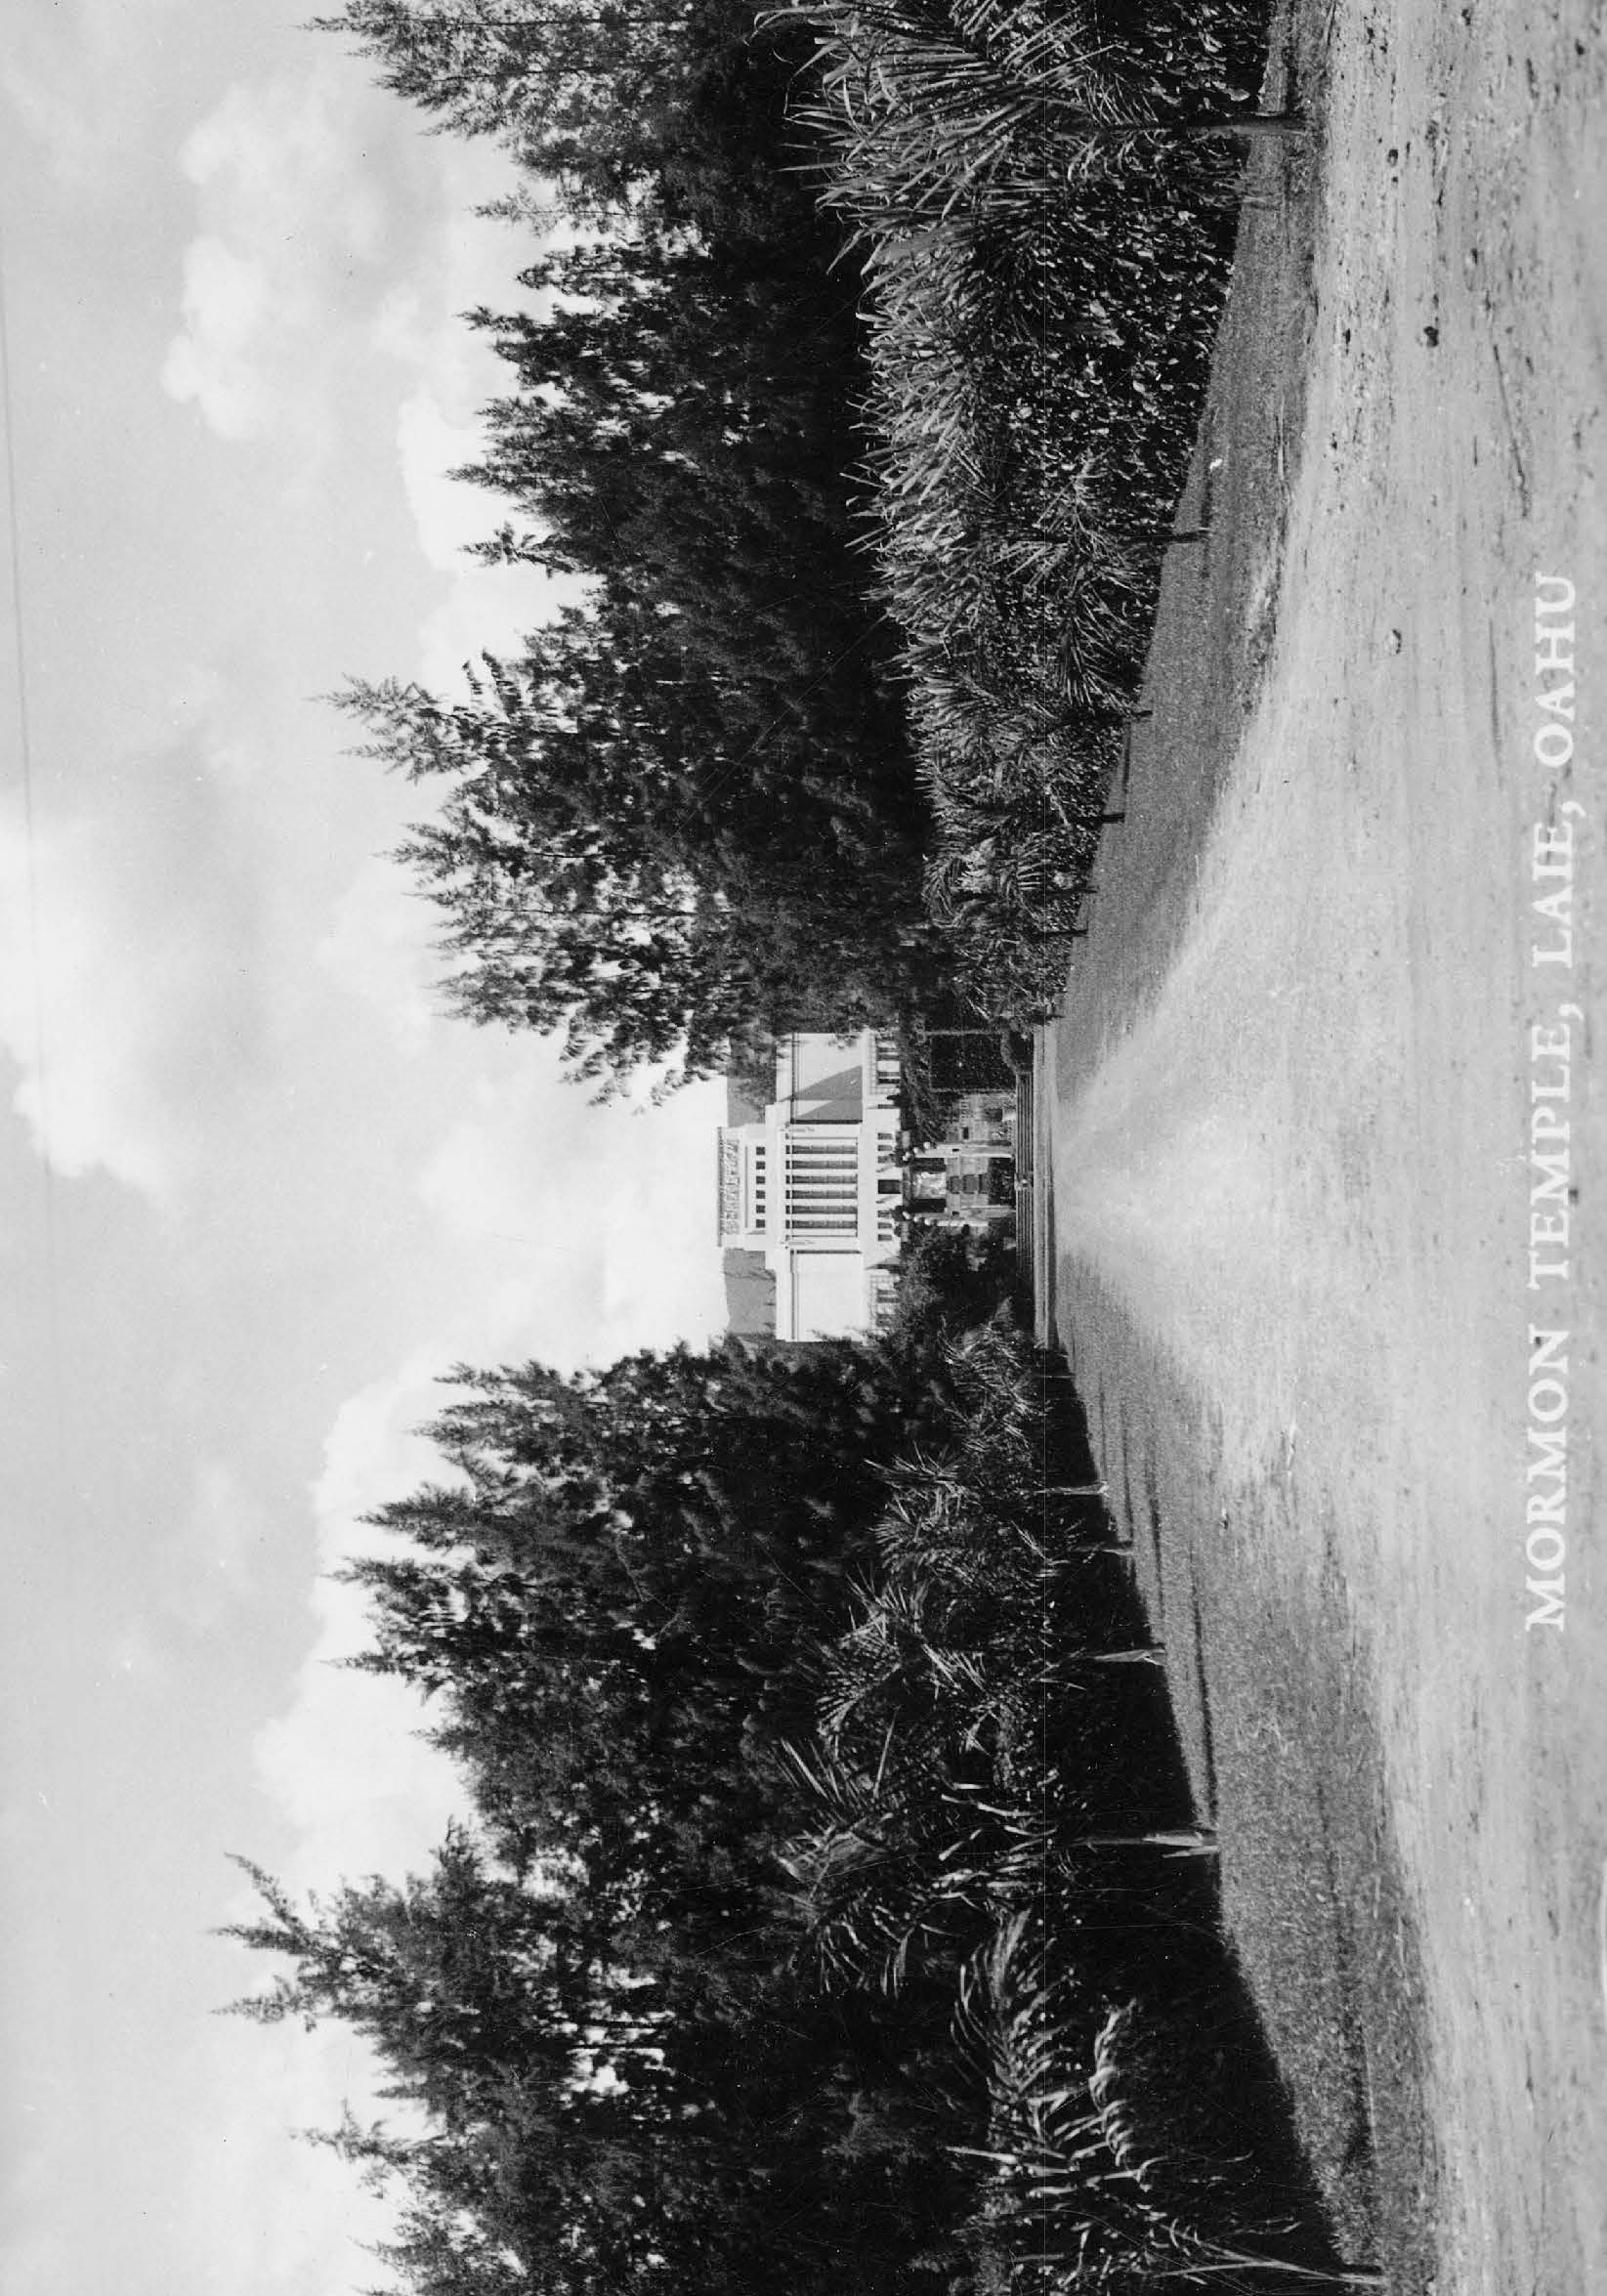 Among other projects in the 1930s, the road leading to the temple was extended and beautified to help keep local members employed during years of economic depression. Courtesy of BYU–Hawaii Archives.